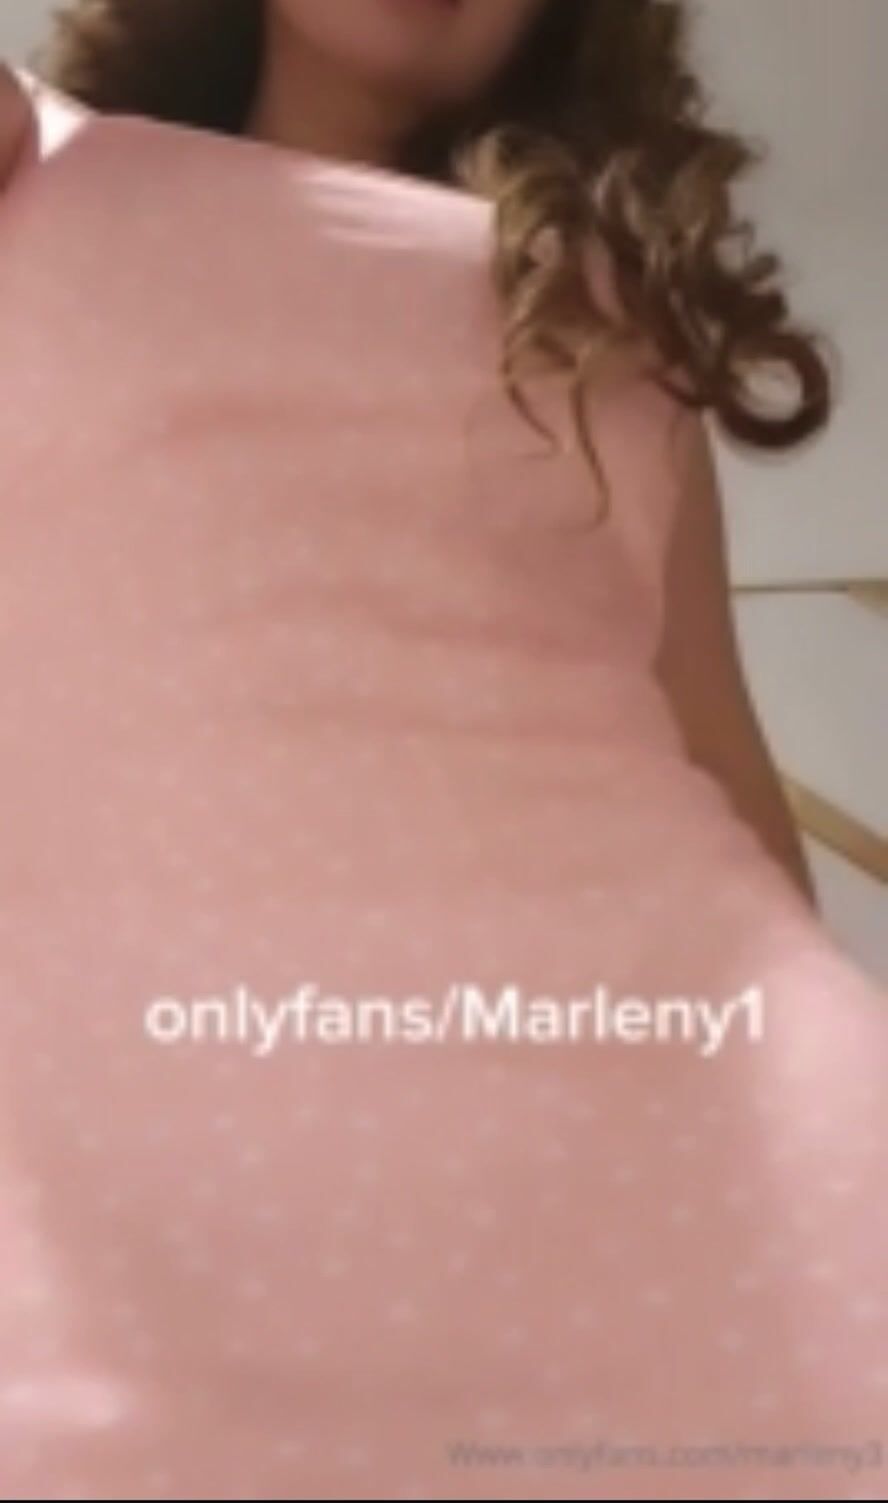 Marleny1 of bed tease